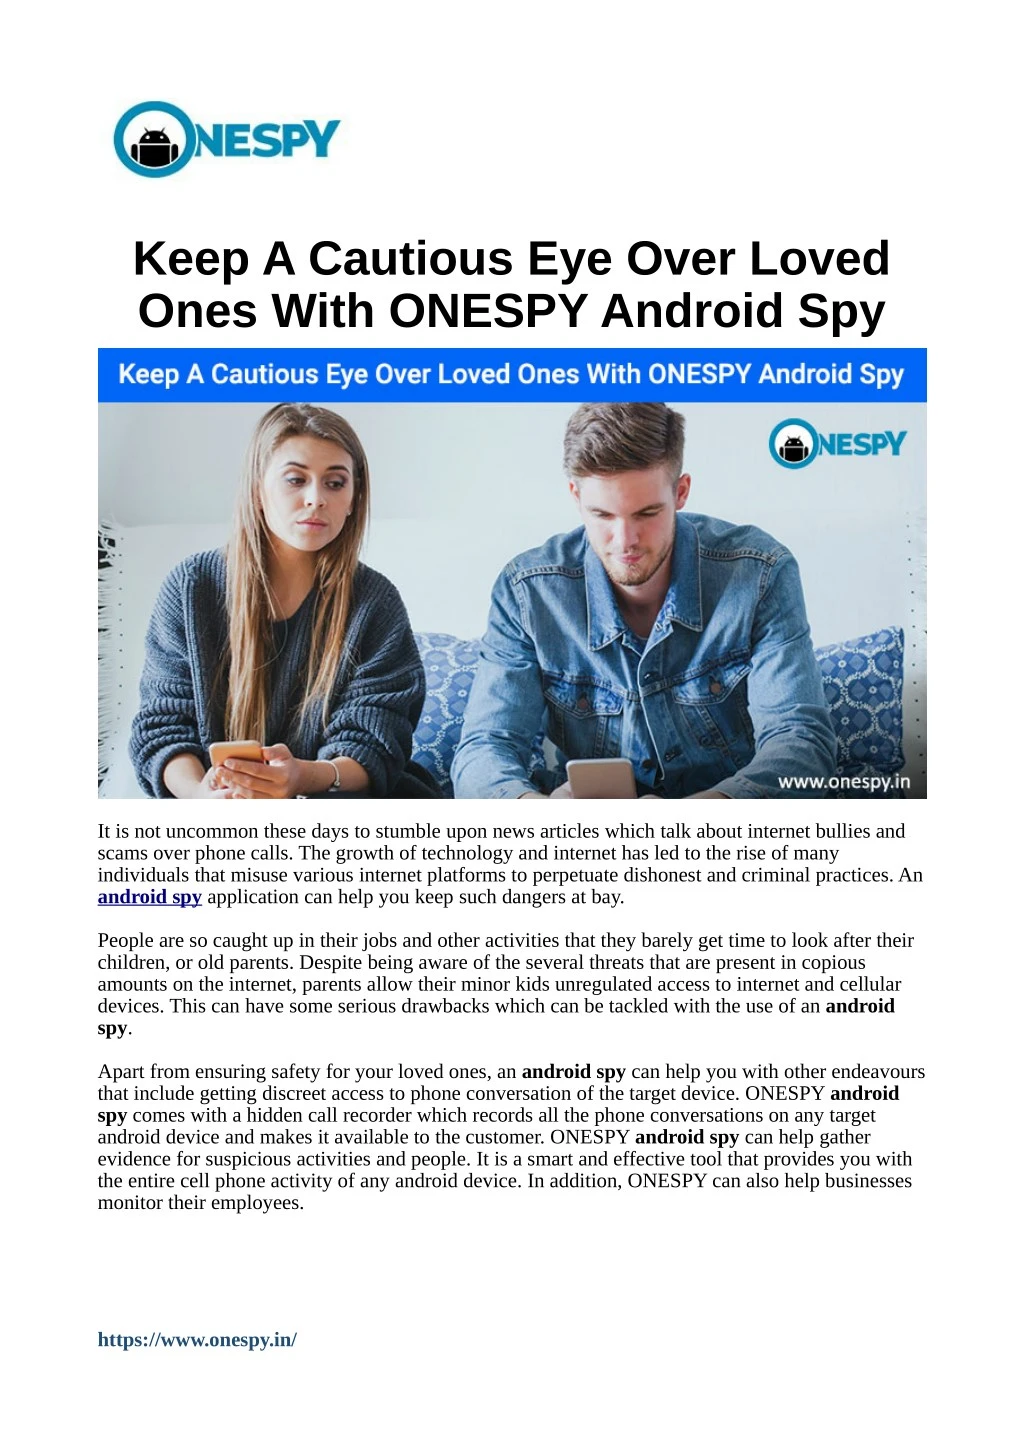 keep a cautious eye over loved ones with onespy